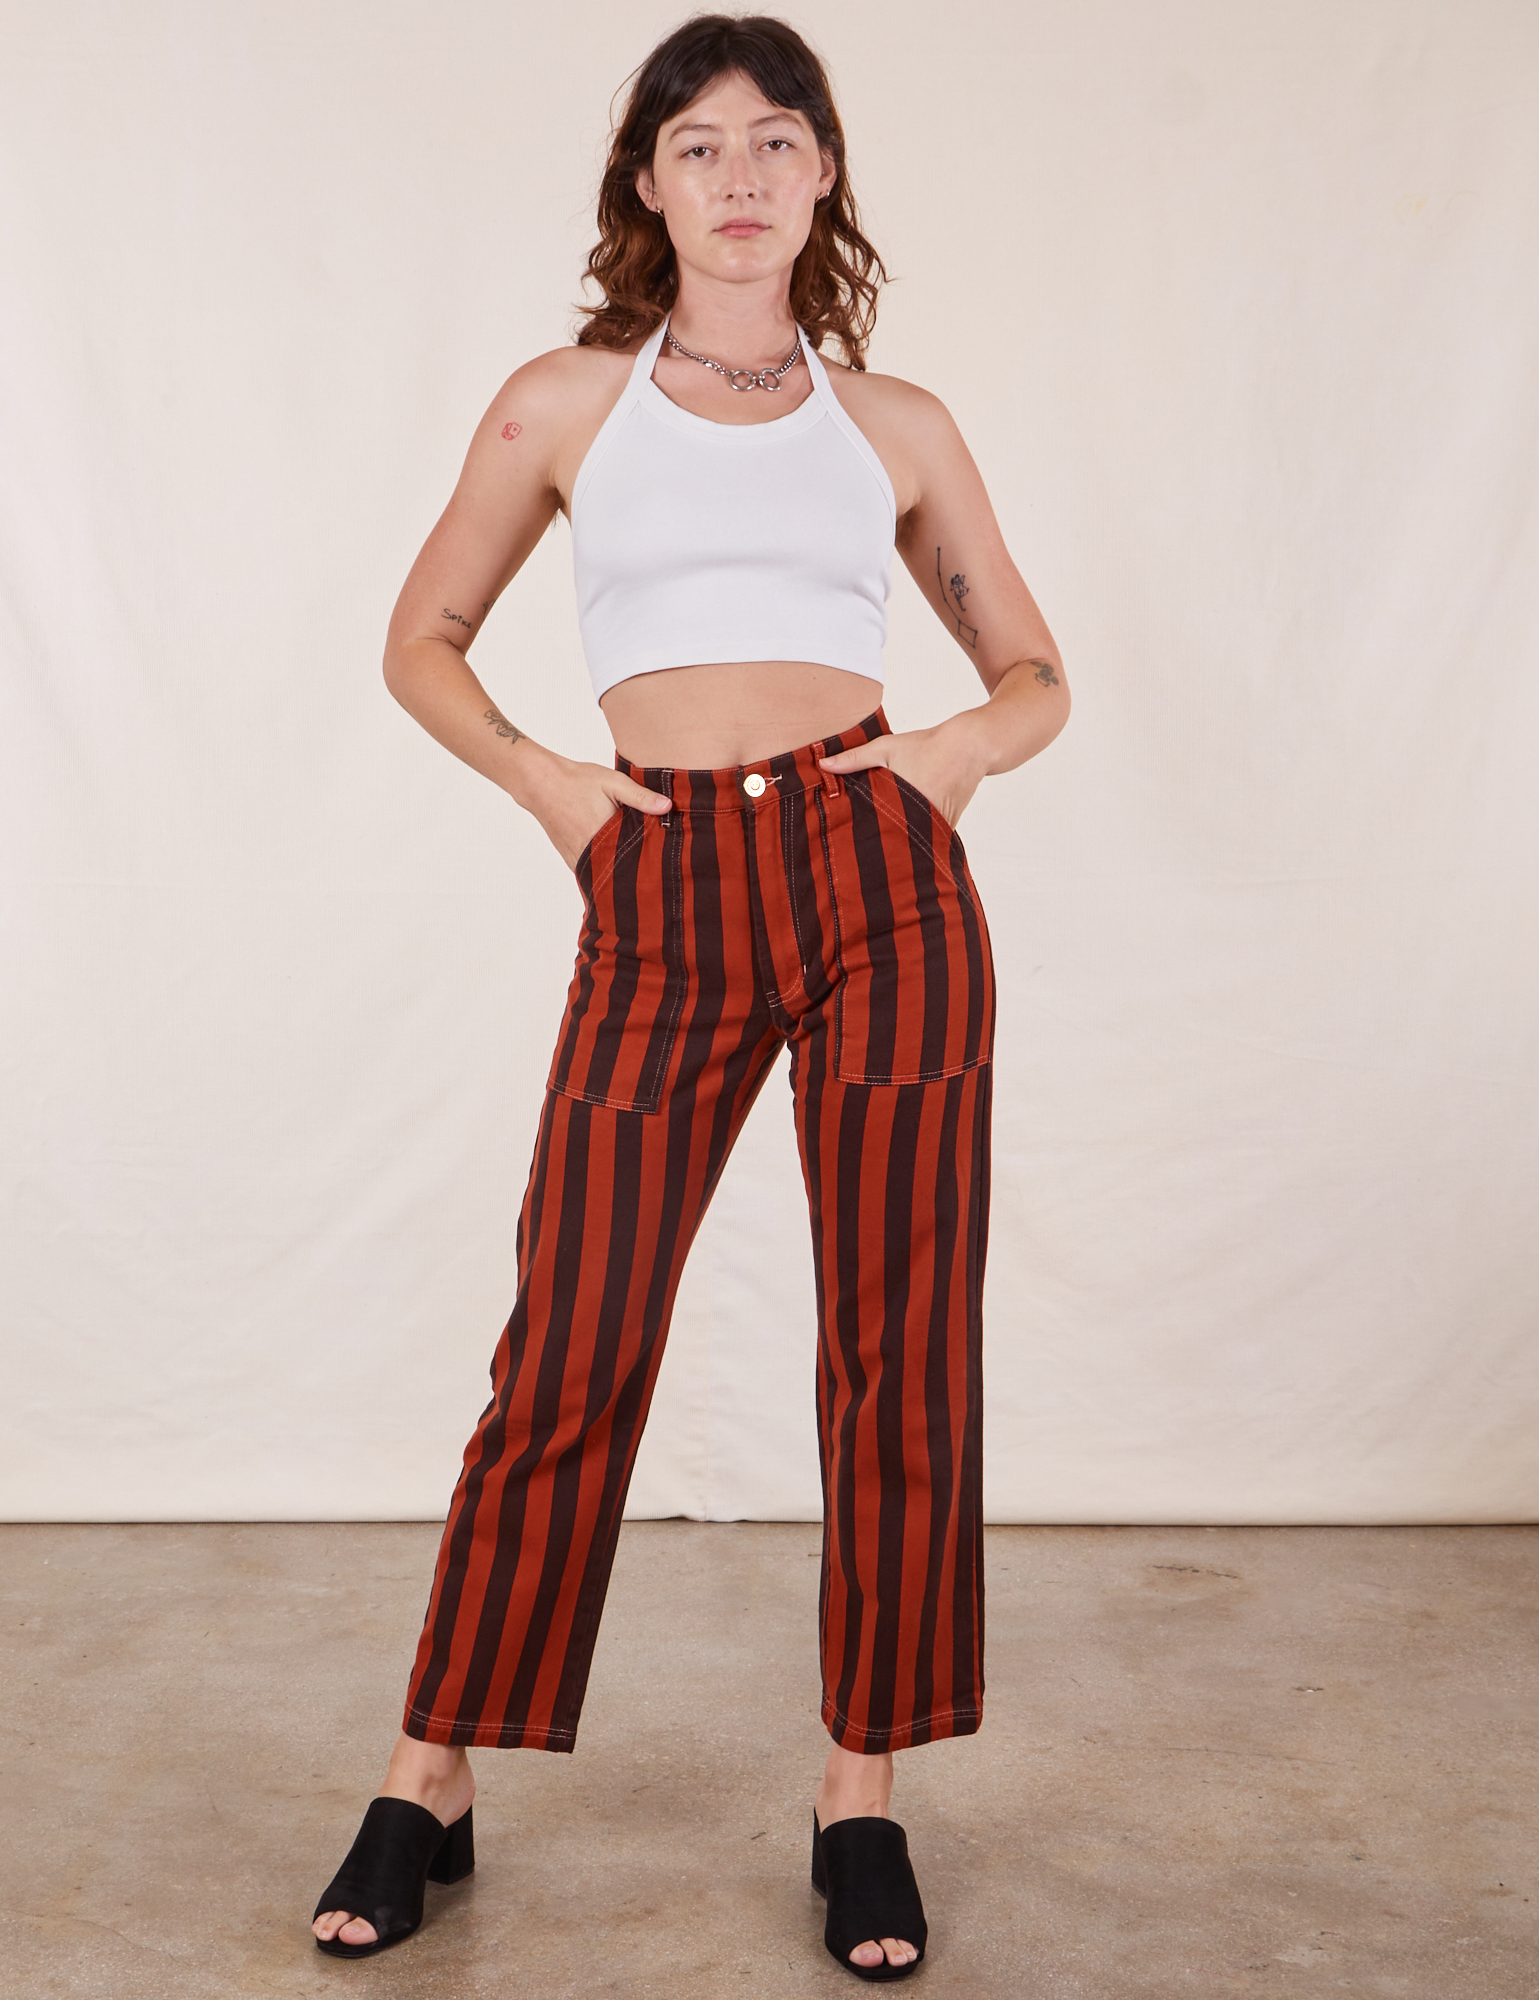 Alex is 5&#39;8&quot; and wearing XS Black Striped Work Pants in Paprika paired with vintage off-white Halter Top